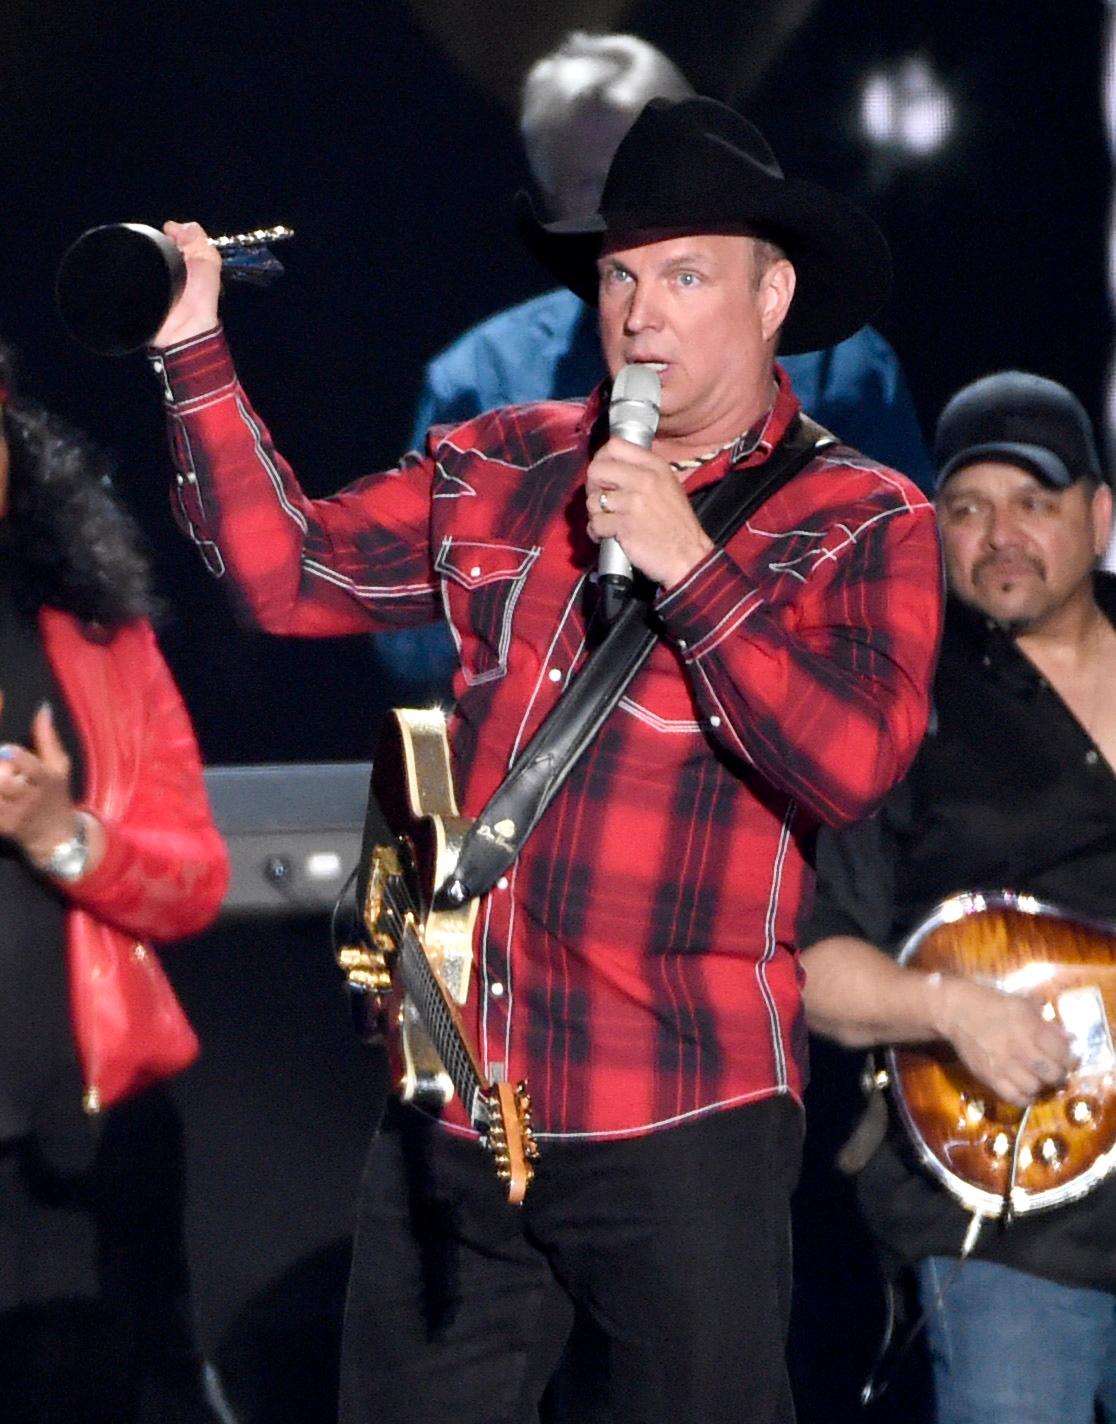 Garth Brooks Performs A Special Tribute To The Military During The ACMs!